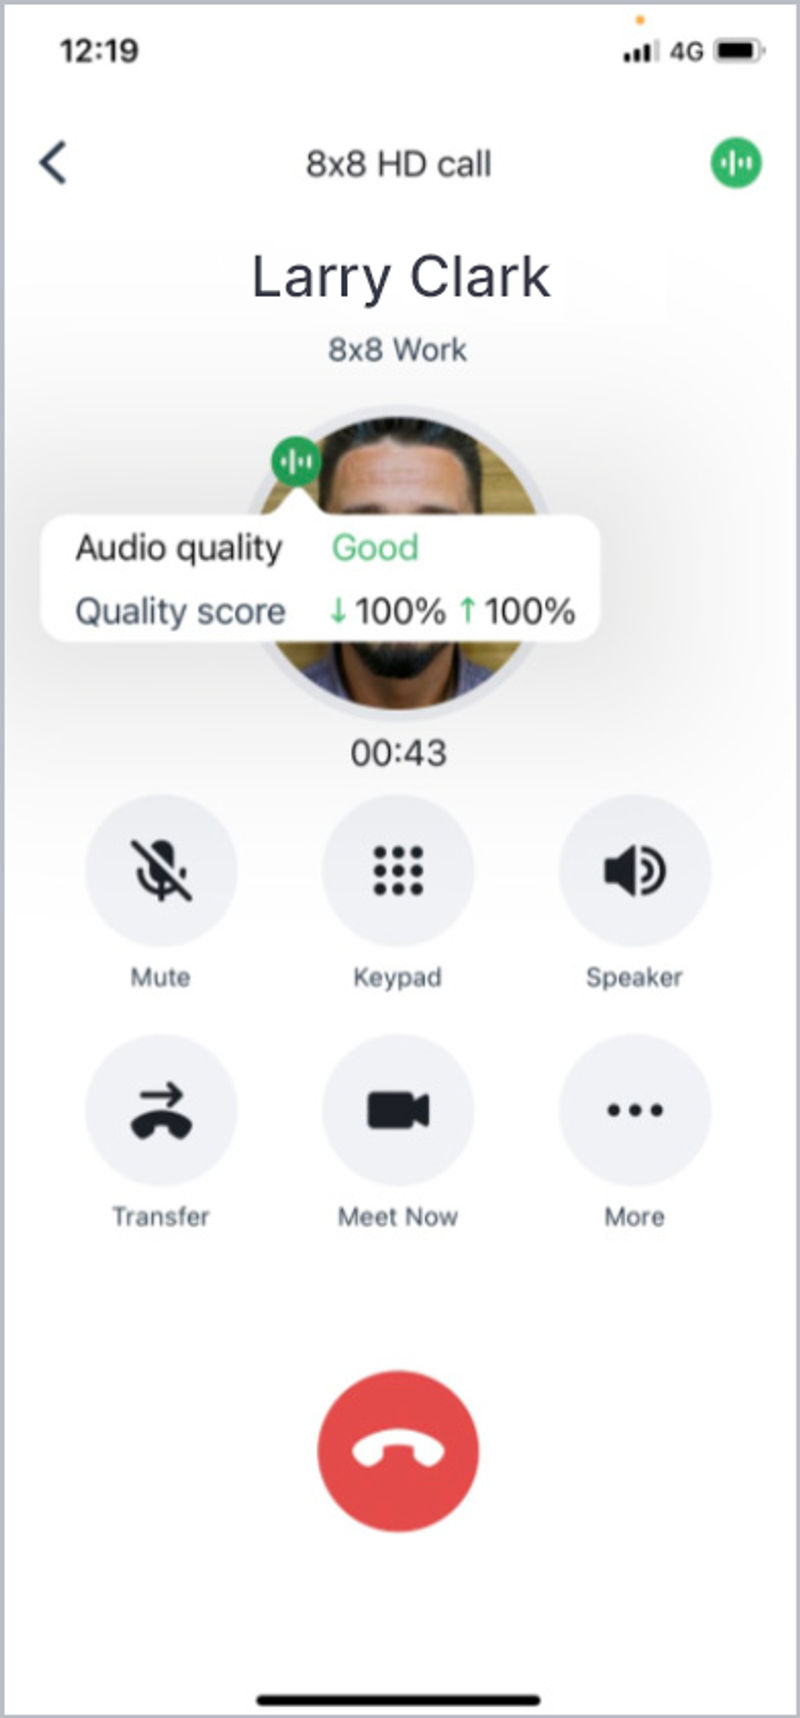 8x8 Work call user experience highlighting the call quality indicator